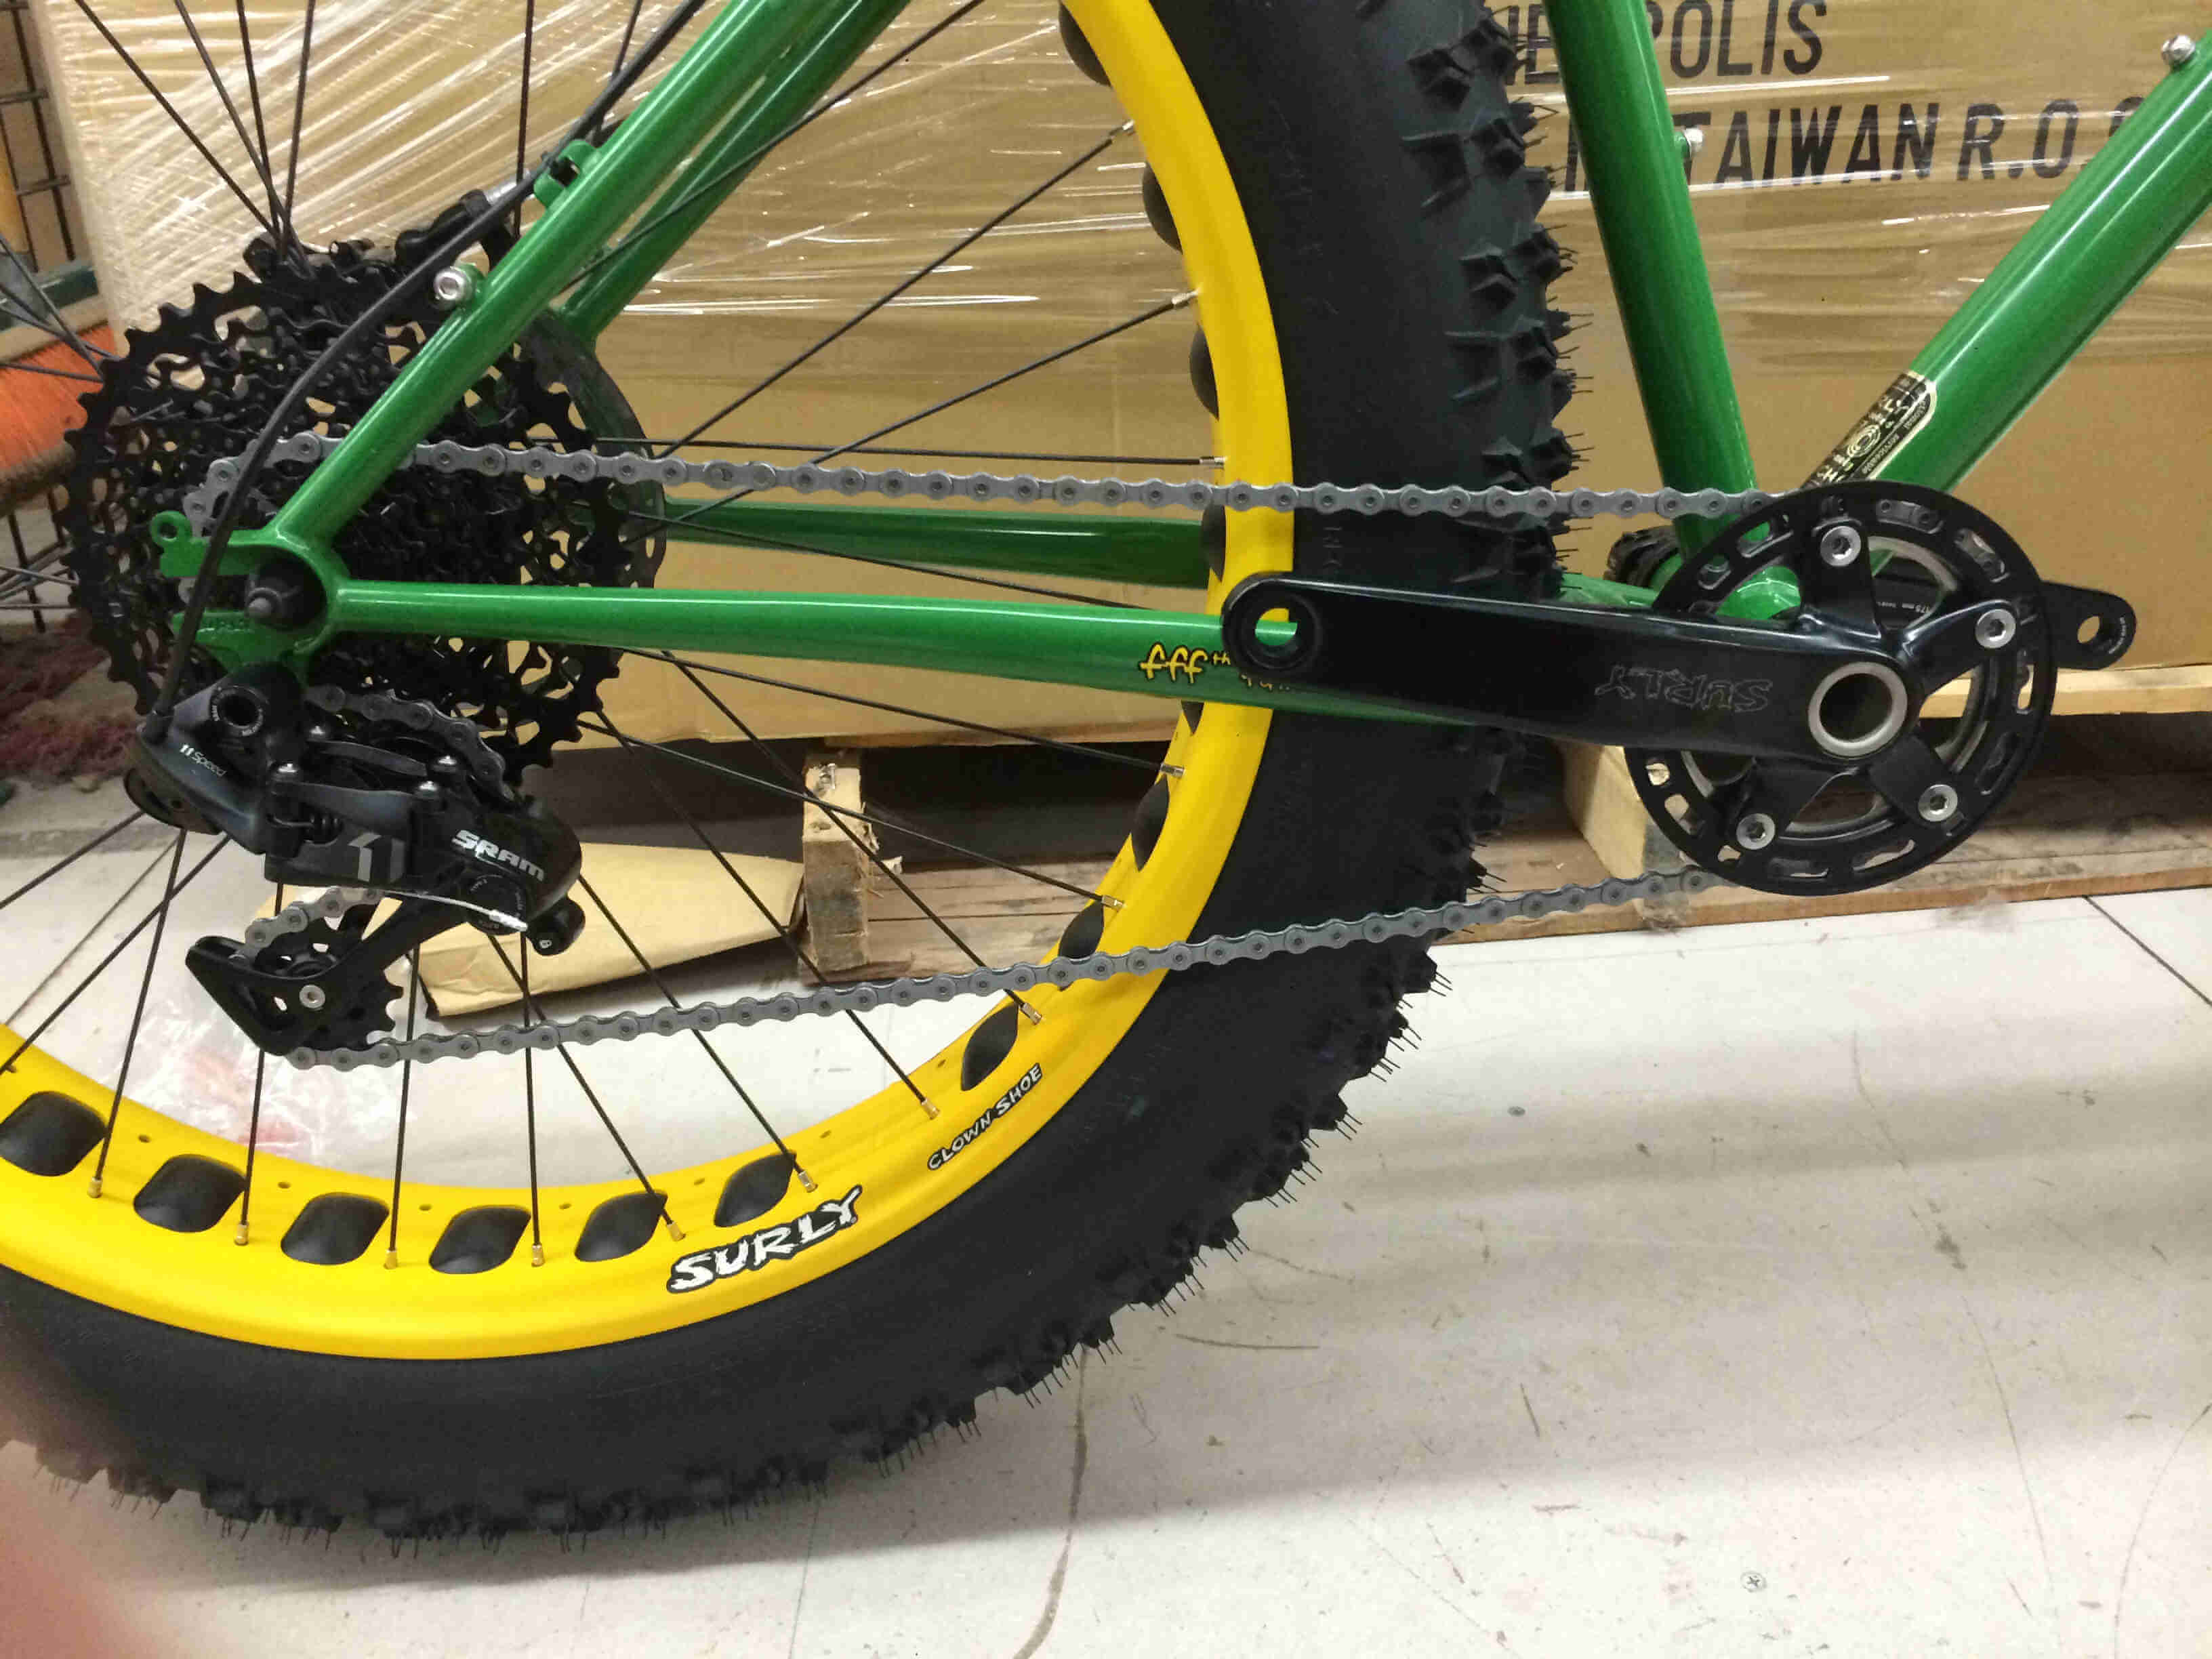 Close up, right side view of the drive train on a green Surly Moonlander bike